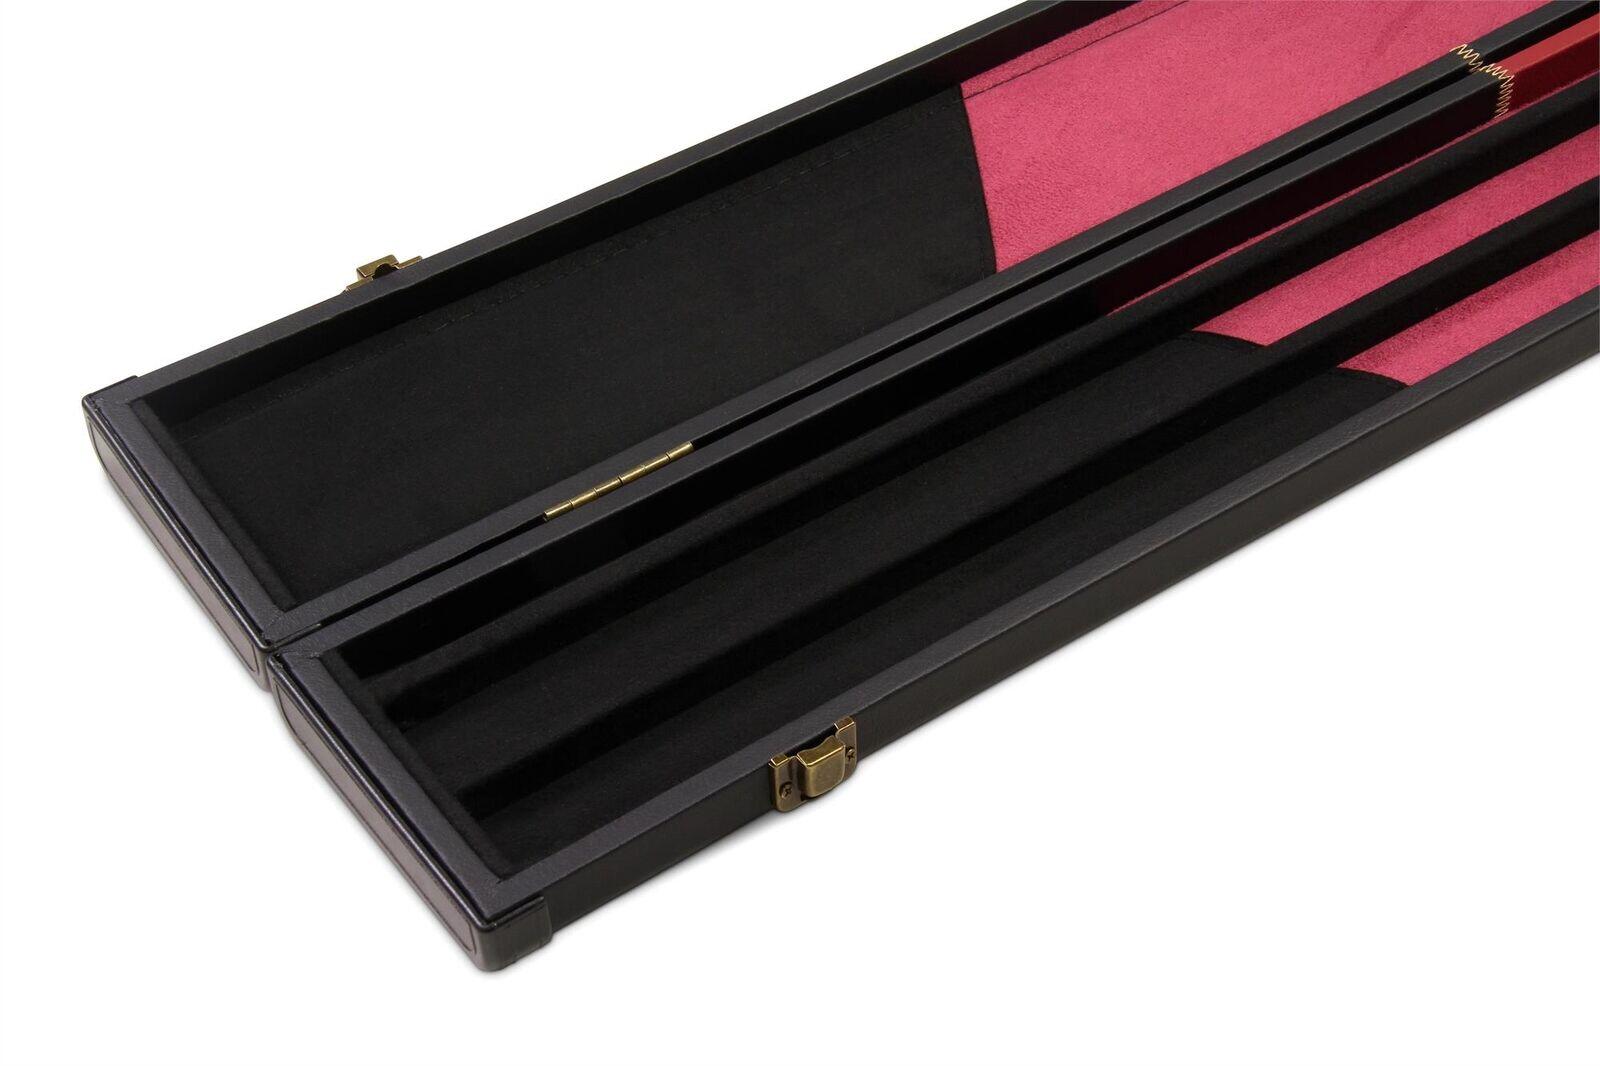 Deluxe 1 Piece WIDE BURGUNDY CHEQUERED Snooker Pool Cue Case - Holds 3 Cues 7/7